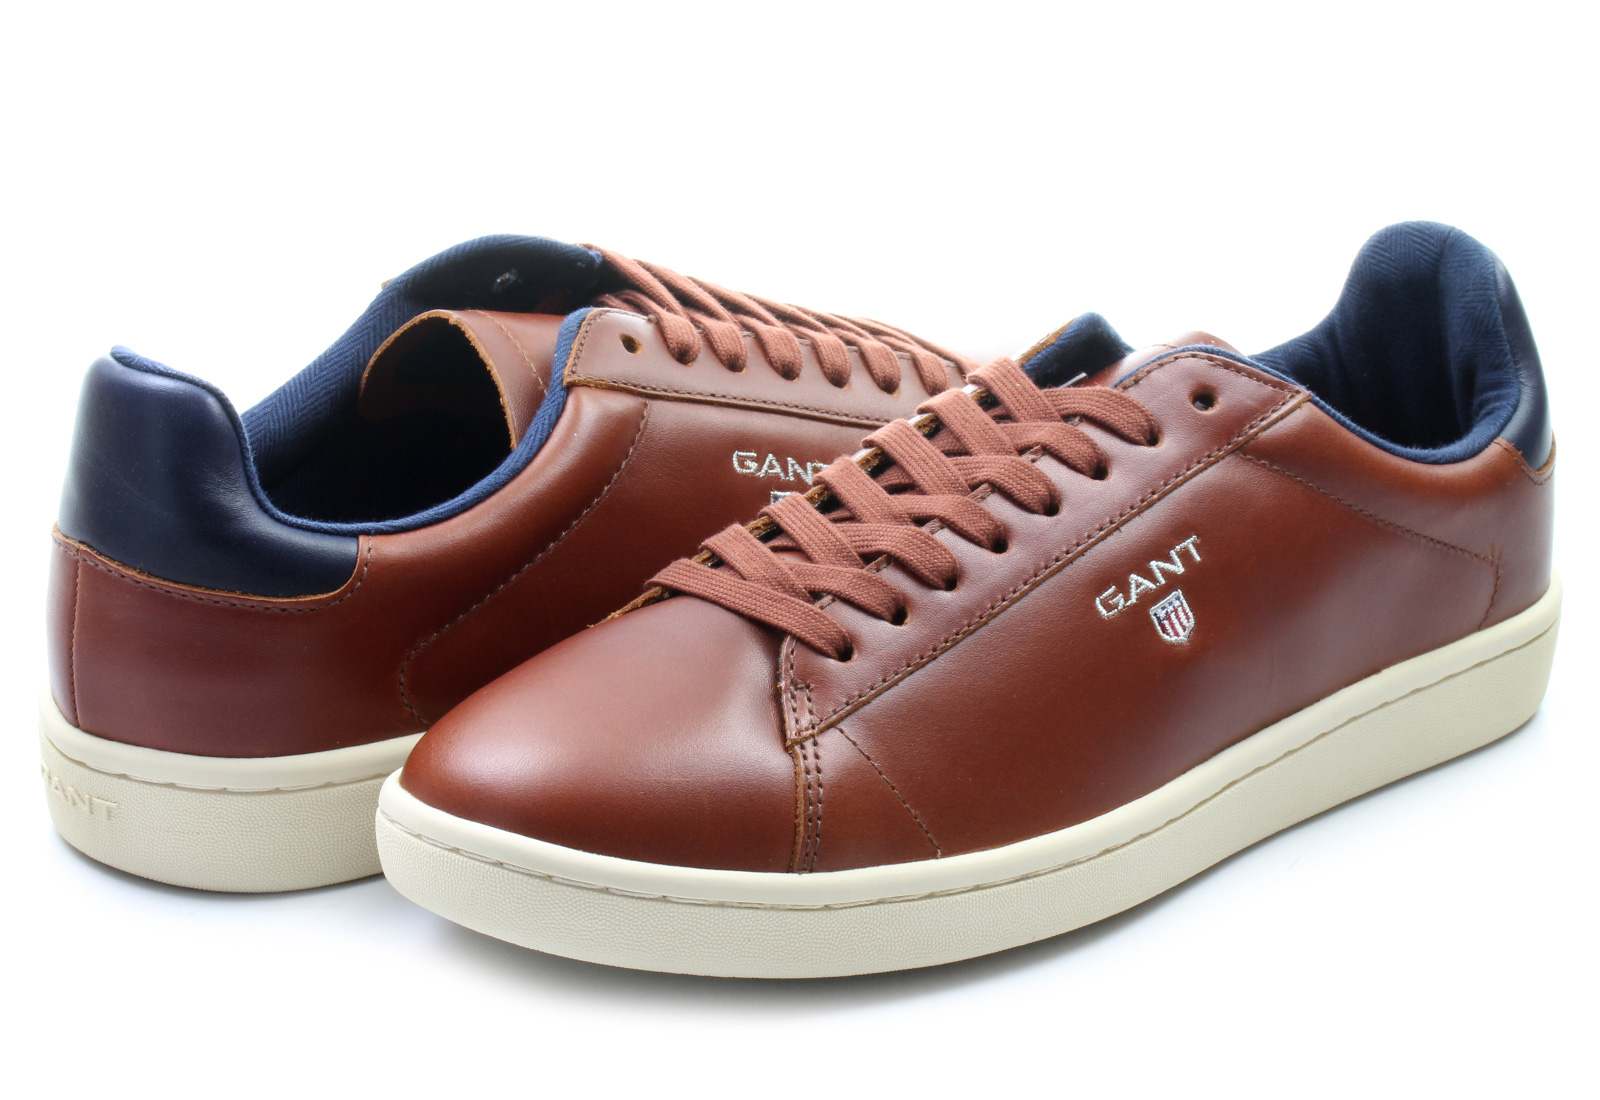 Gant Shoes - Ace - 11631818-G45 - Online shop for sneakers, shoes and boots